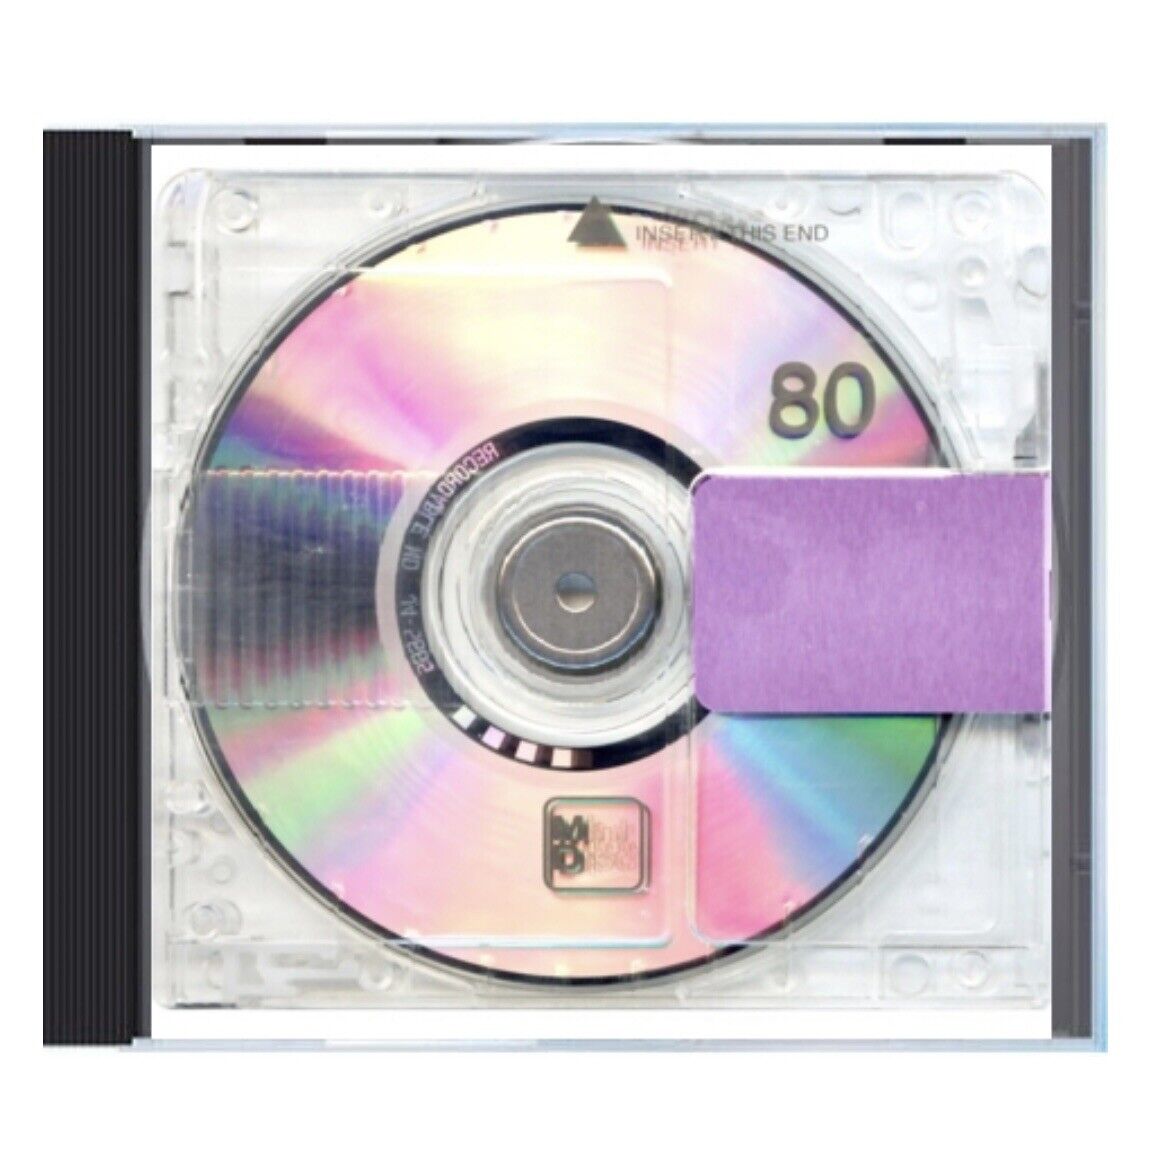 Kanye West - Yandhi Unofficial Updated CD 💿 Up To Date Tracks 2018/2019